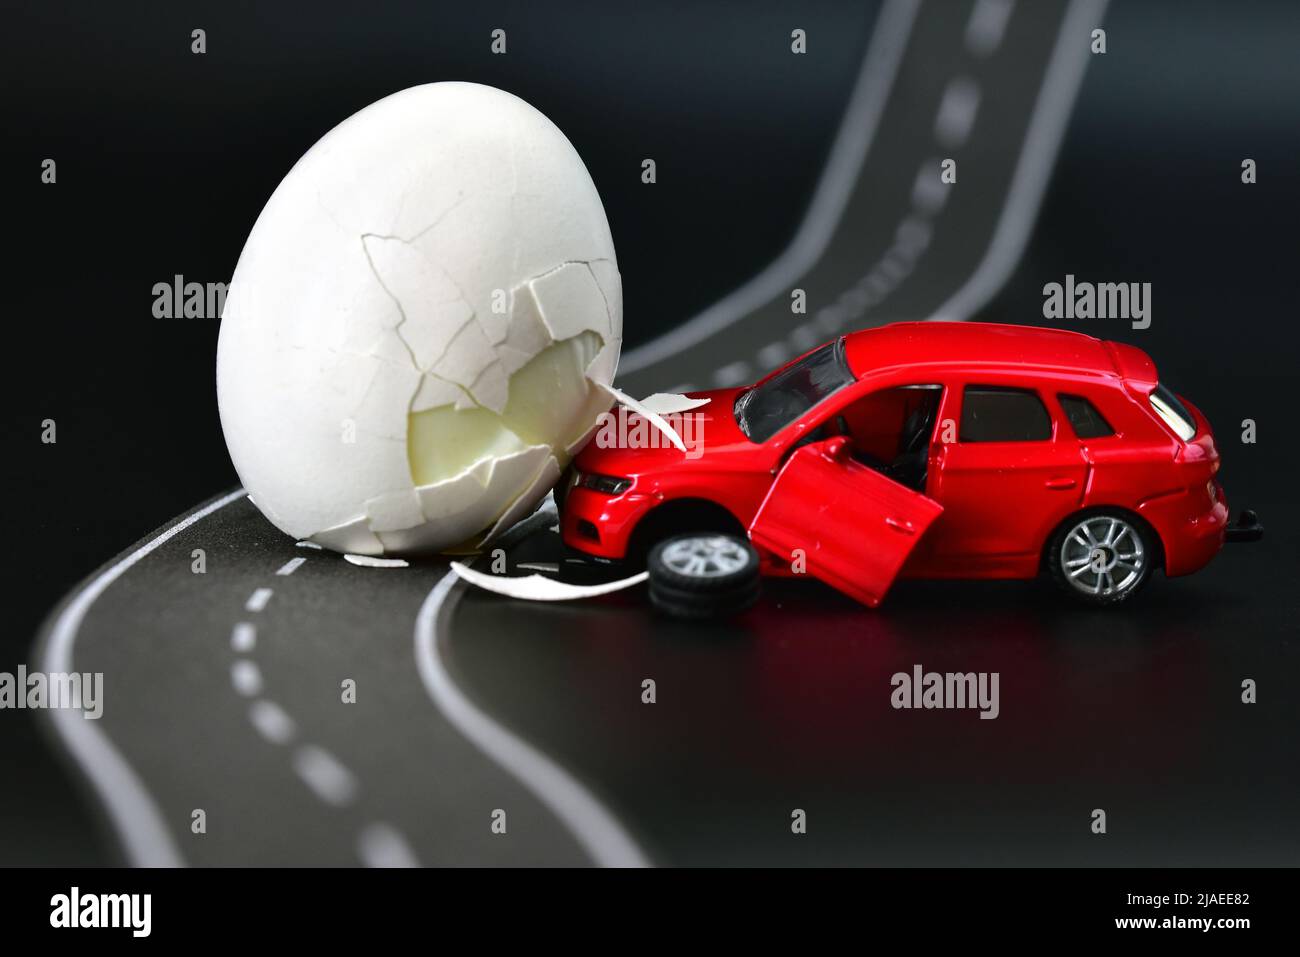 egg with toy car chrash accident funny picture Stock Photo